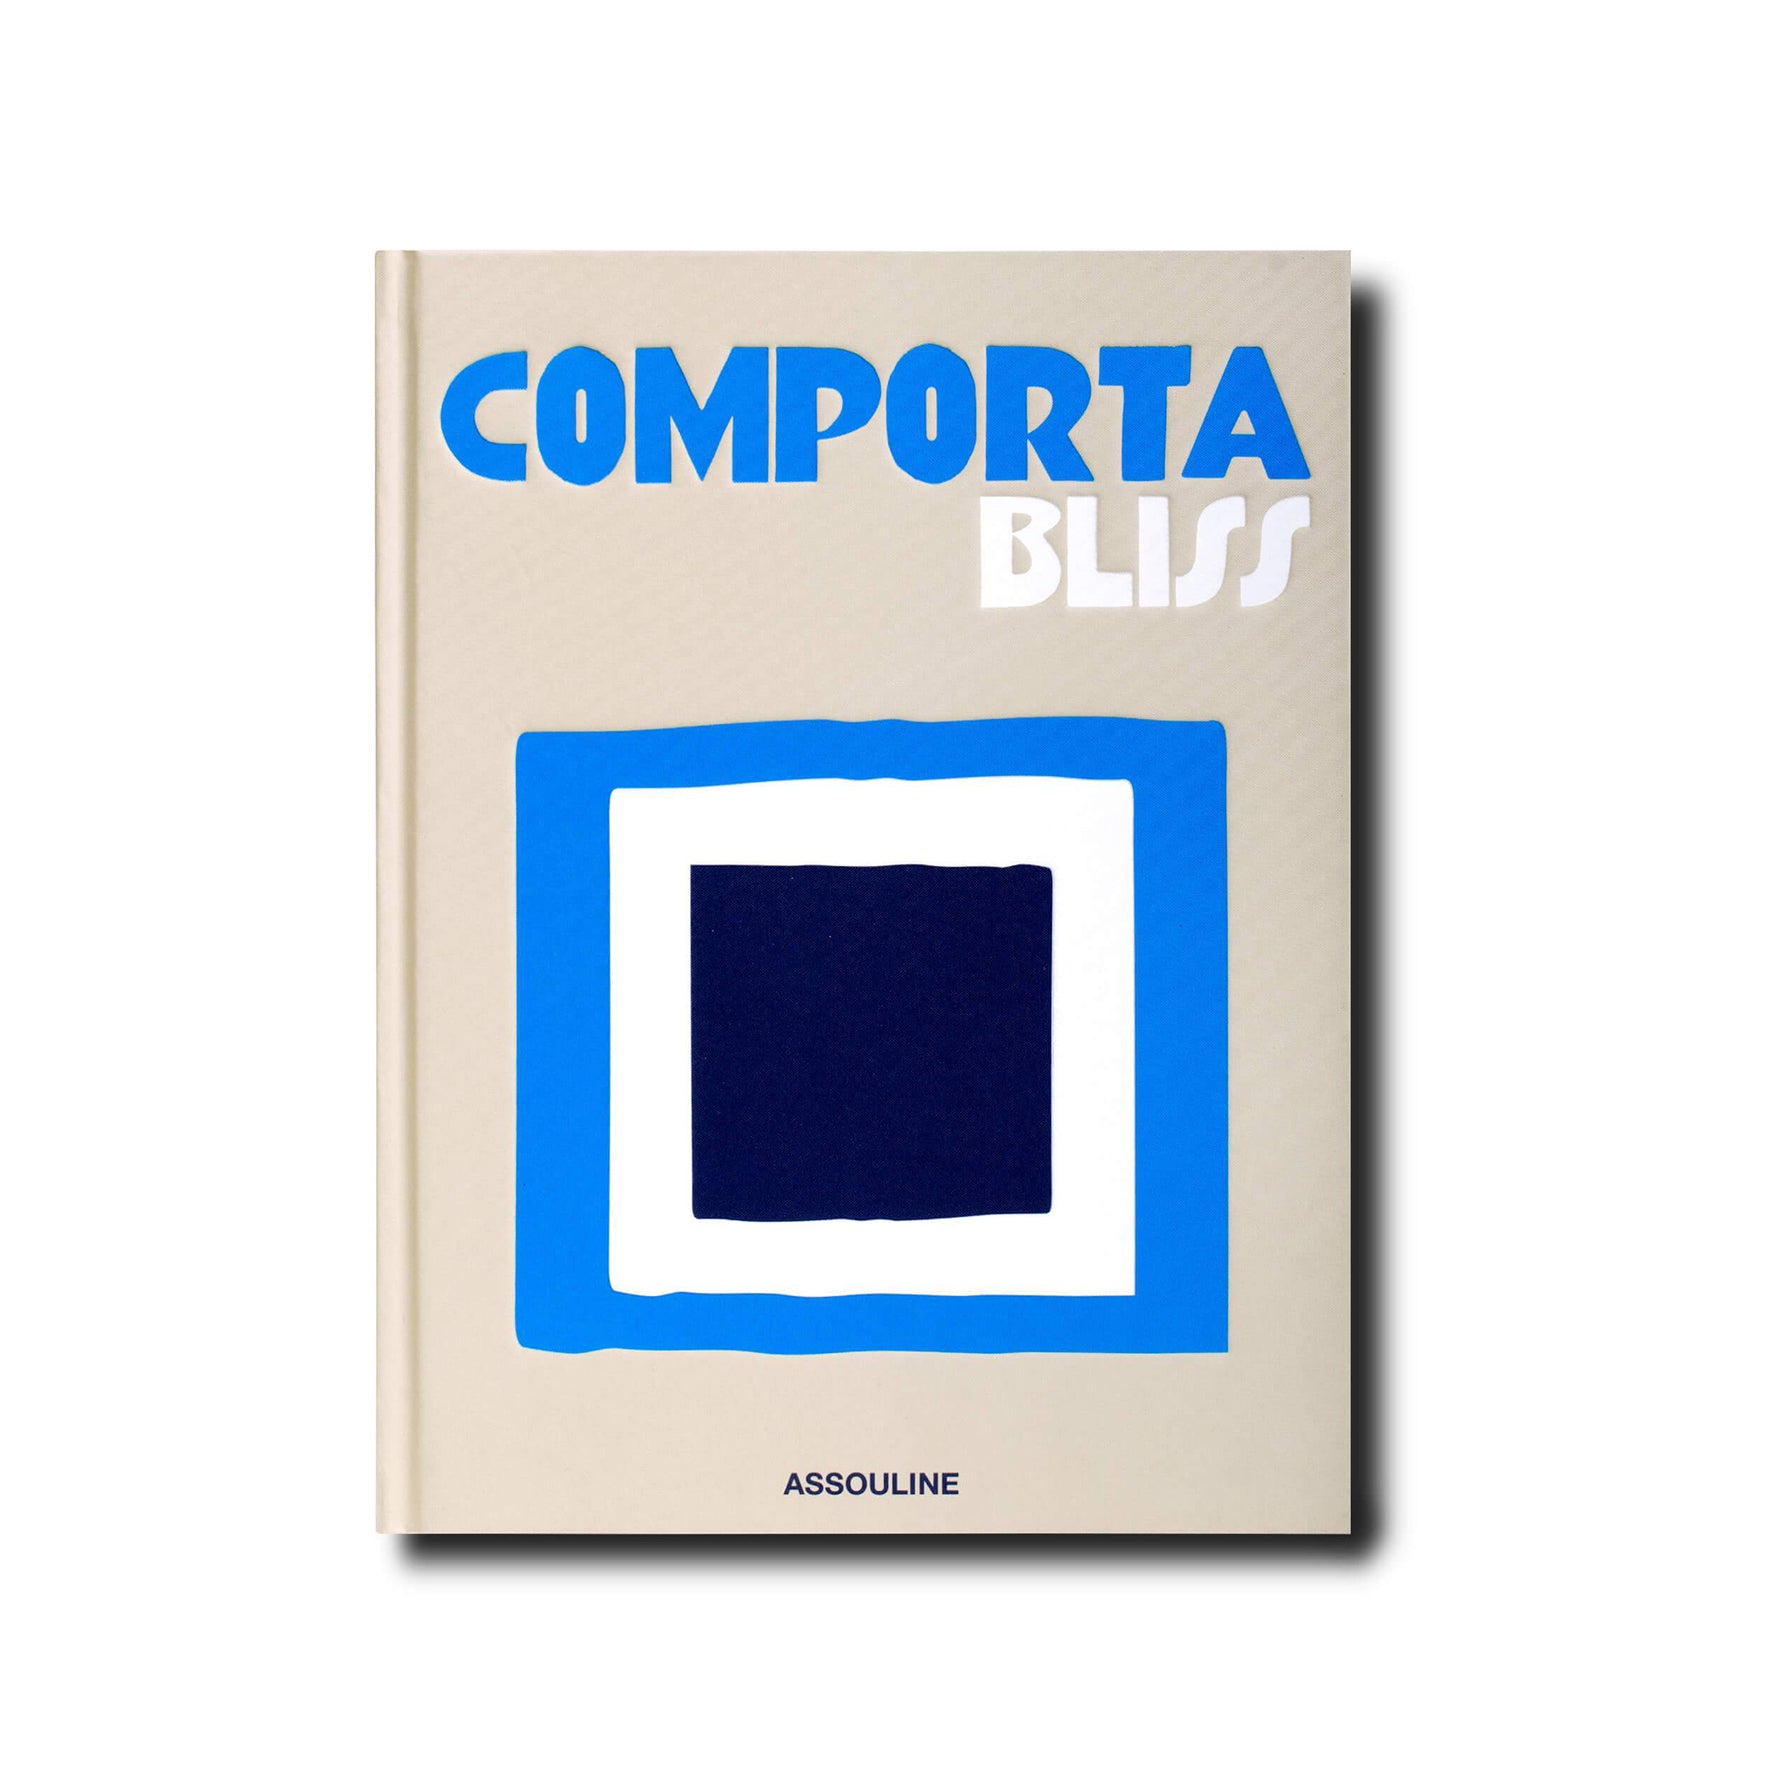 Comporta Bliss by Assouline